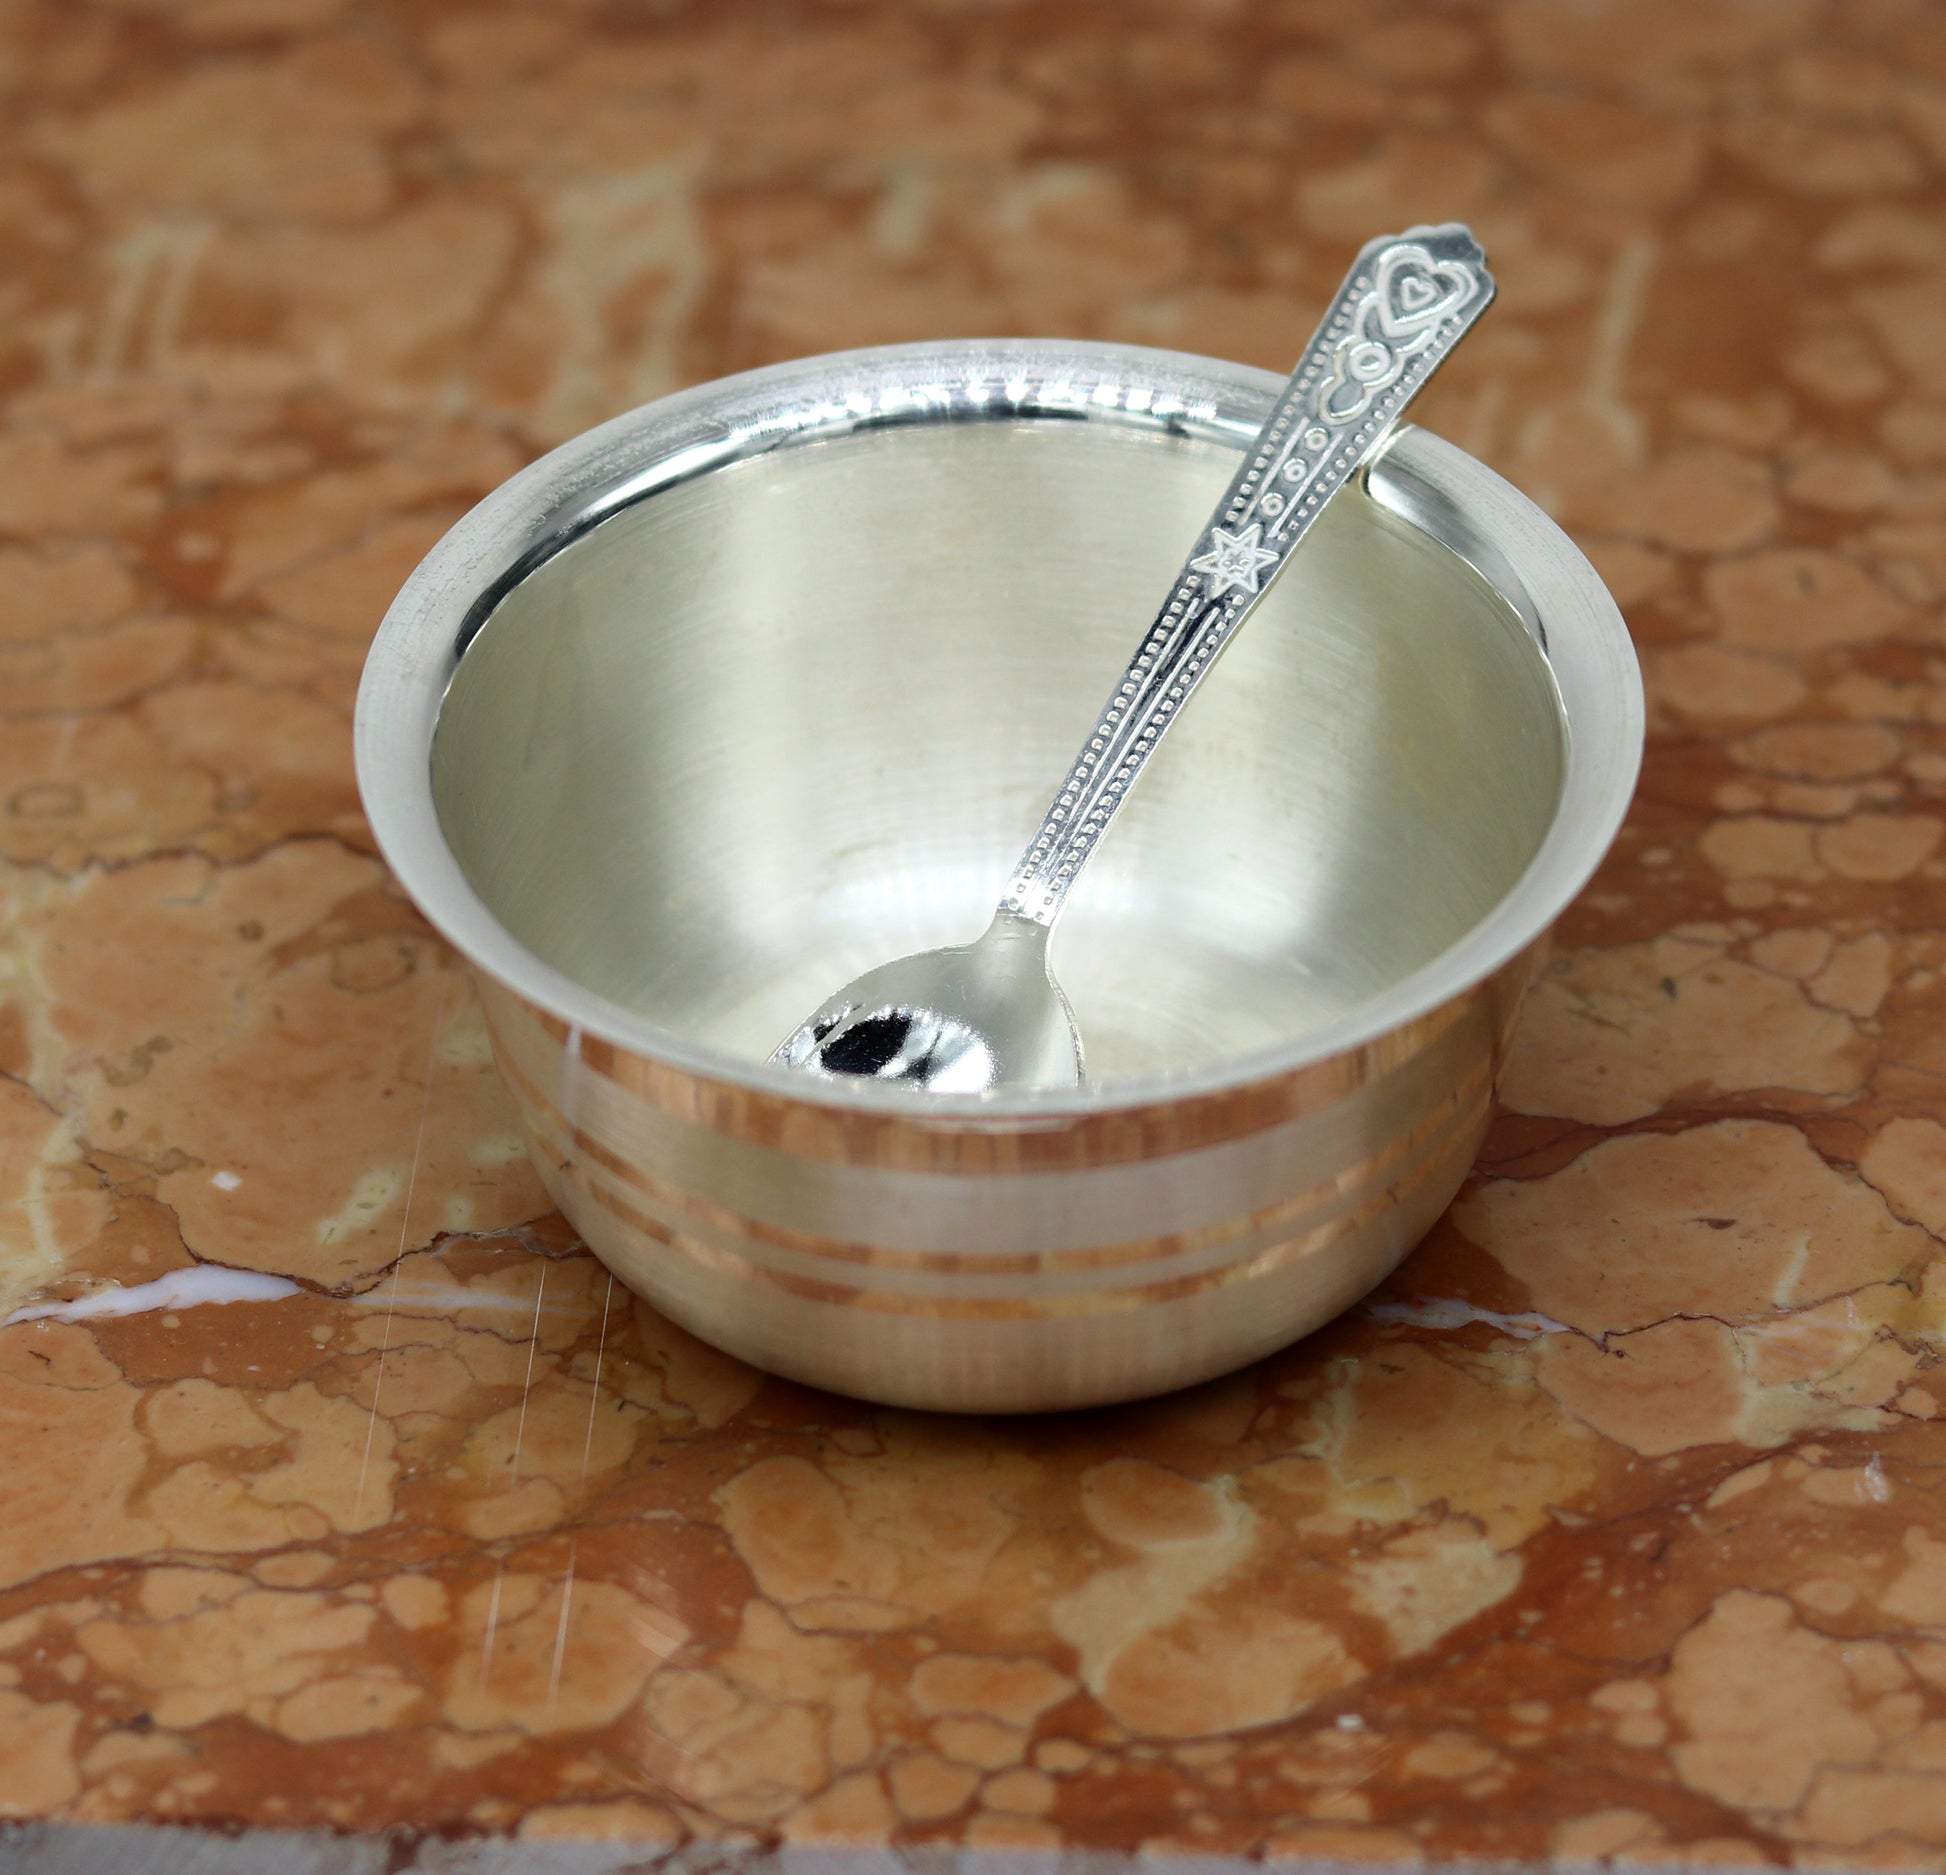 999 pure sterling silver handmade solid silver bowl and spoon, silver has antibacterial properties, keep stay healthy, silver vessels sv64 - TRIBAL ORNAMENTS